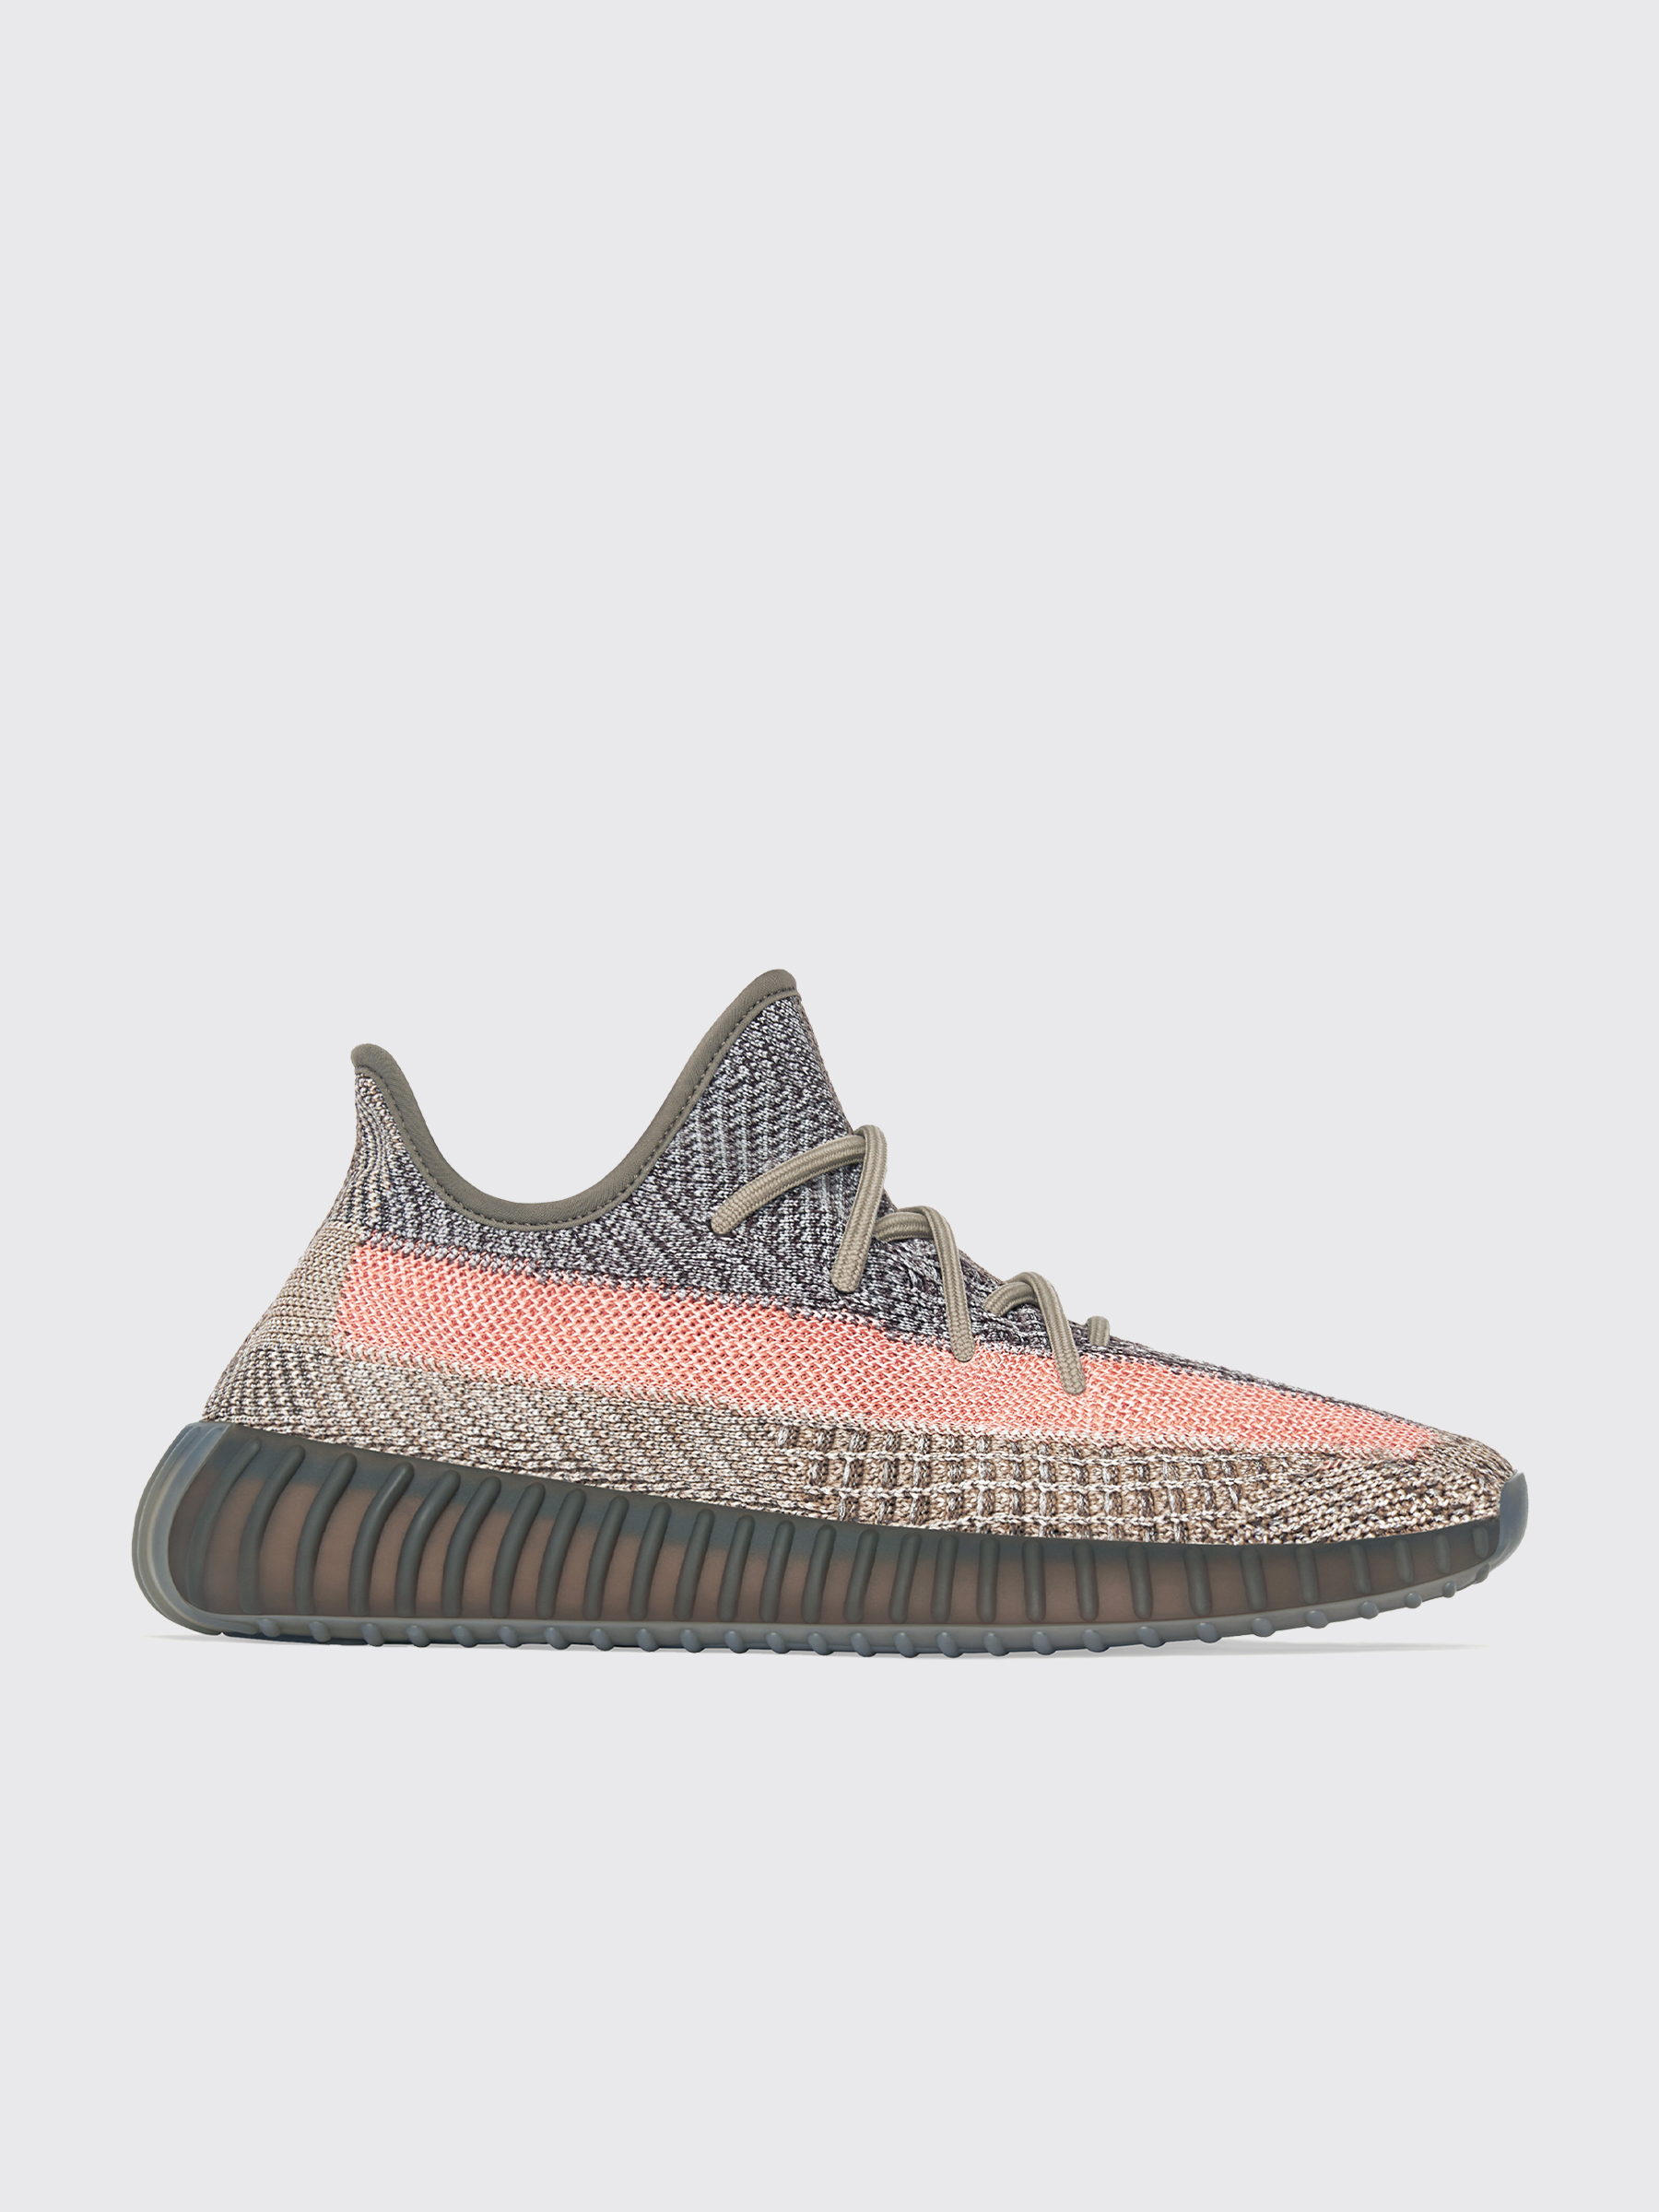 where can i get the yeezy boost 350 v2